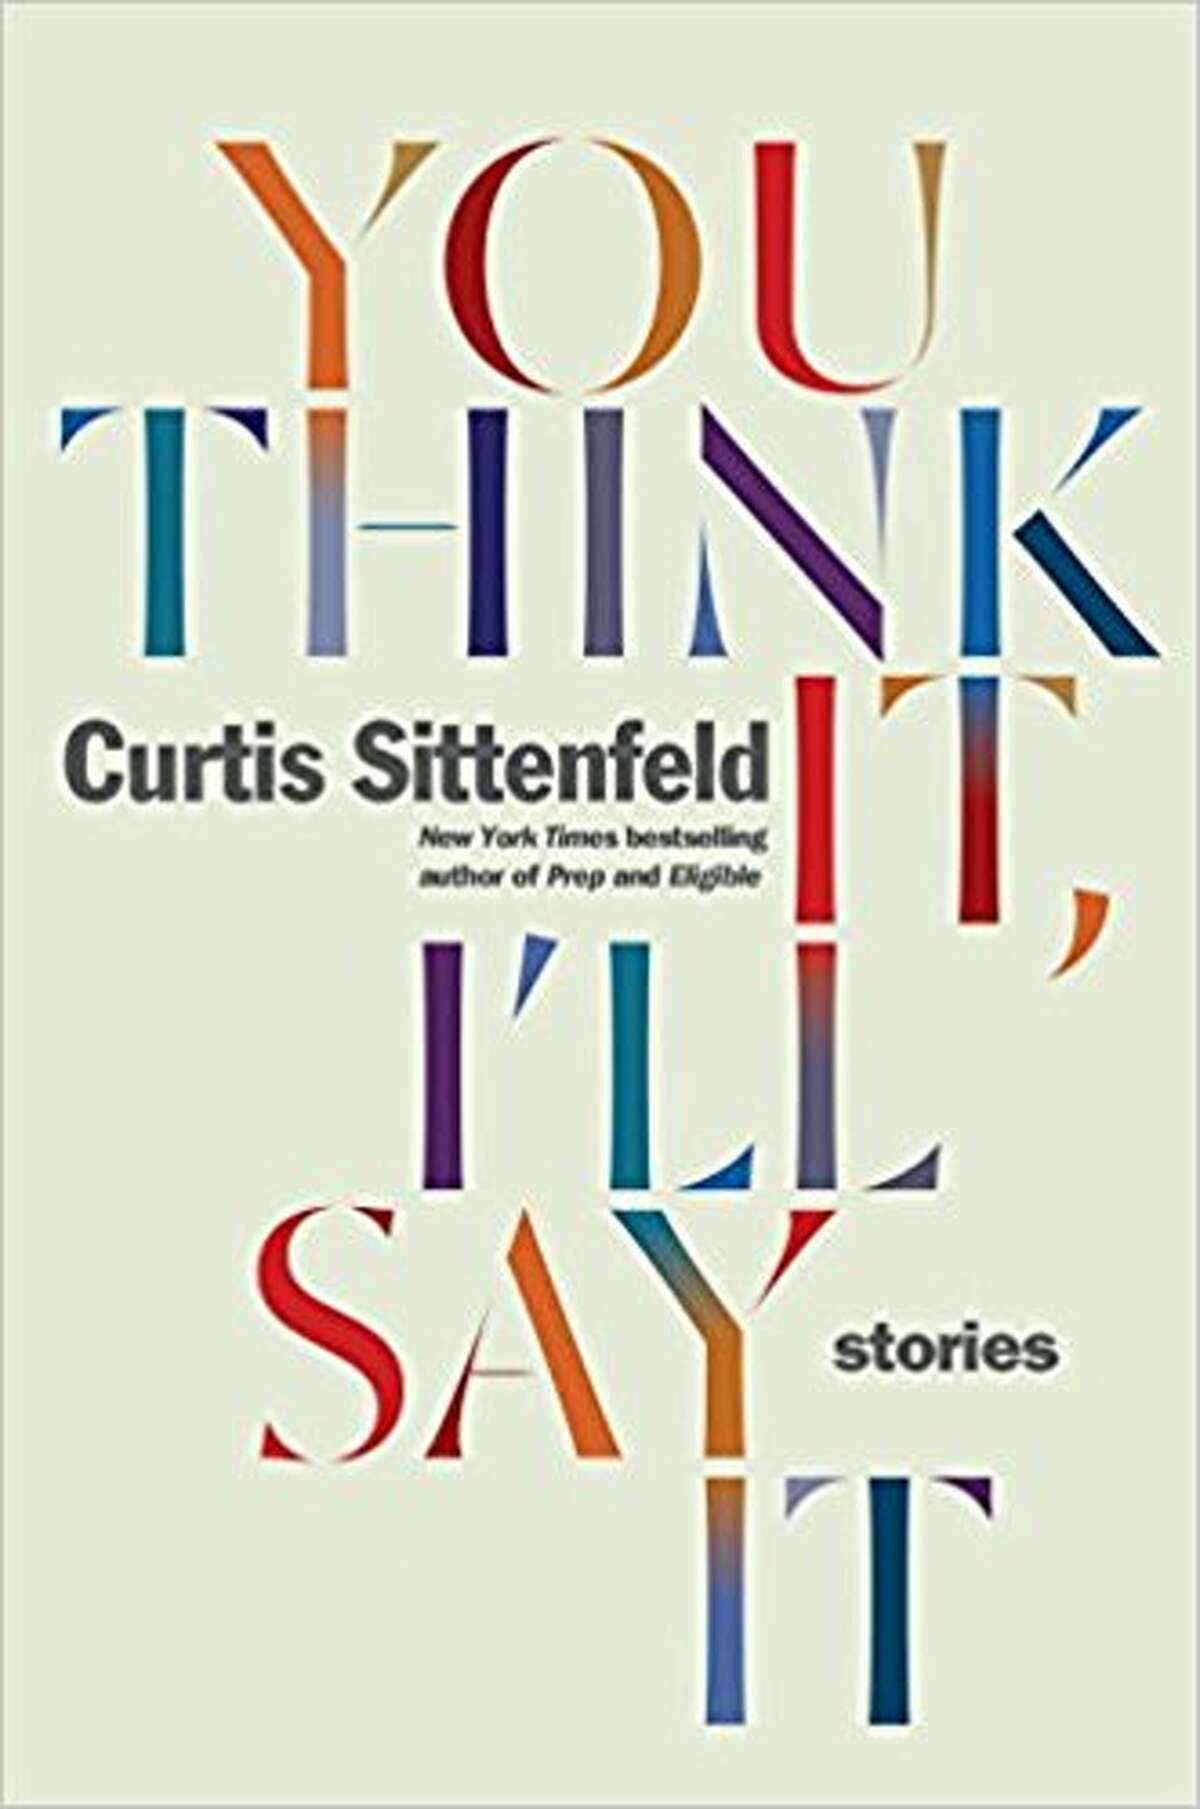 The new collection showcases Sittenfeld's gifts for scrutinizing the psyches of the privileged.